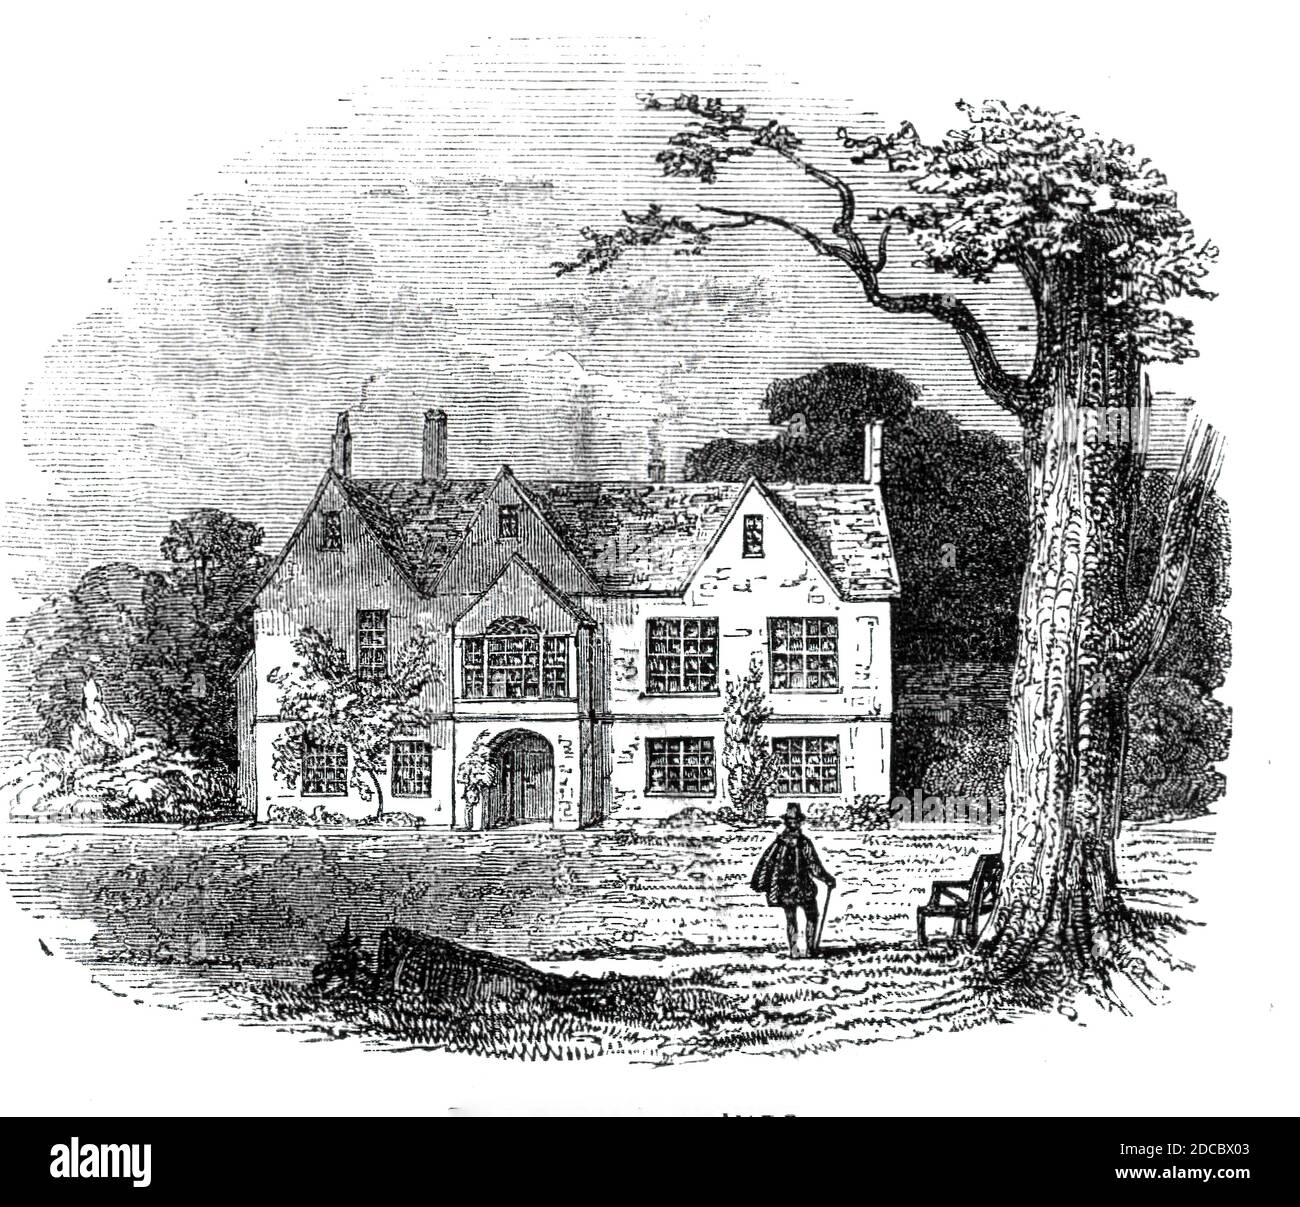 Raleigh's House, 1844. Sir Walter Raleigh's house at Youghal in Ireland. 'It presents the ordinary appearance of the comfortable manor-house of the Elizabethan era, though it was originally a collegiate establishment, consisting of a warden, fellows, and singing men, founded in the year 1464...In the year 1603, Sir Walter Raleigh came into possession of it, and afterwards sold his interest to Sir Richard Boyle, afterwards Earl of Cork. It is now the residence of Colonel Faunt, who has given it the name of Myrtle Grove, and with judgment and good taste has made any alterations or repairs subser Stock Photo